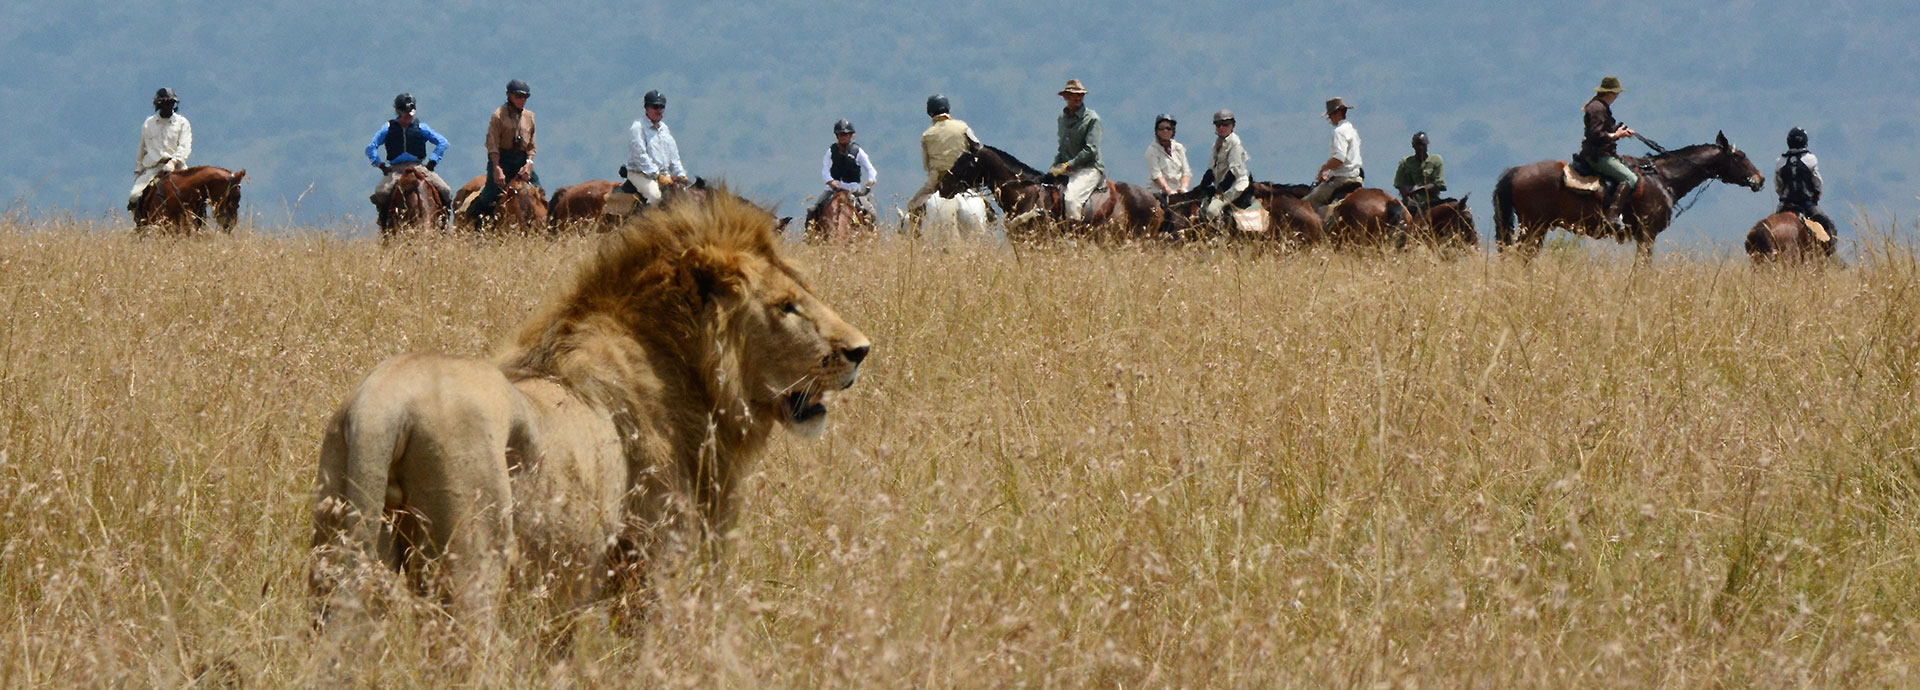 Lion with a horse riding safari in Kenya with Gordie Church and Safaris Unlimited